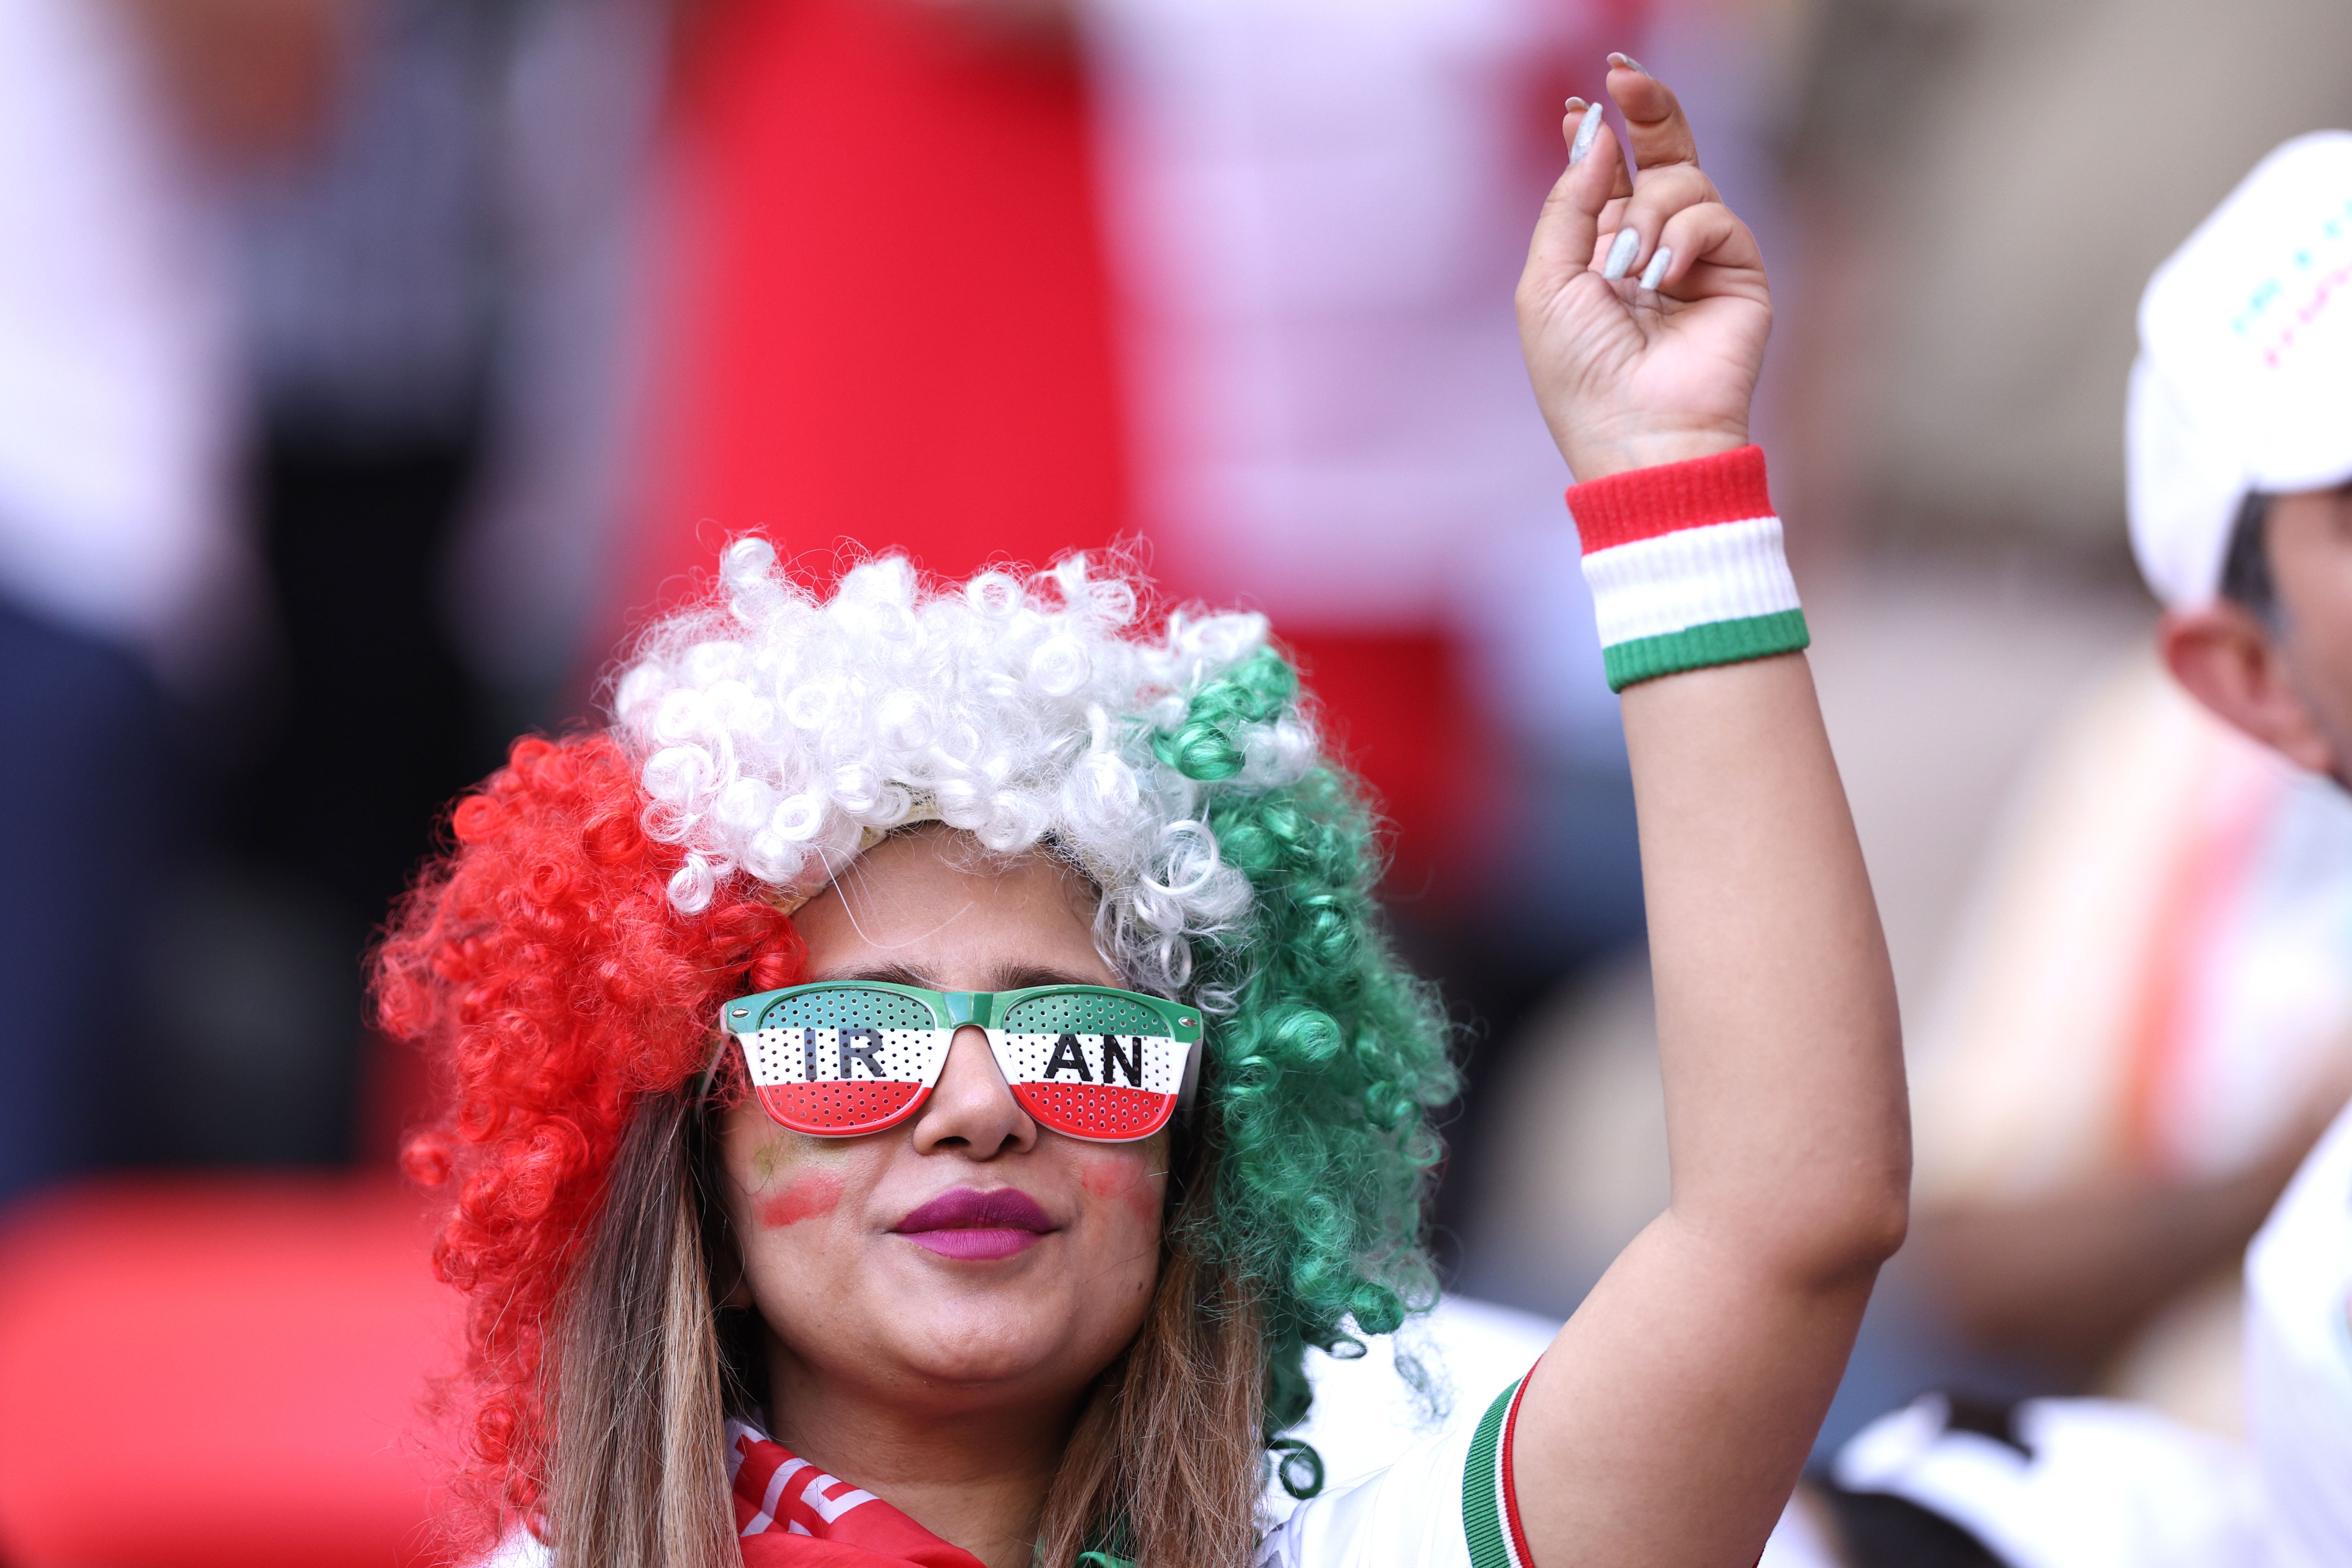 Iran fan at the 2022 World Cup in Qatar